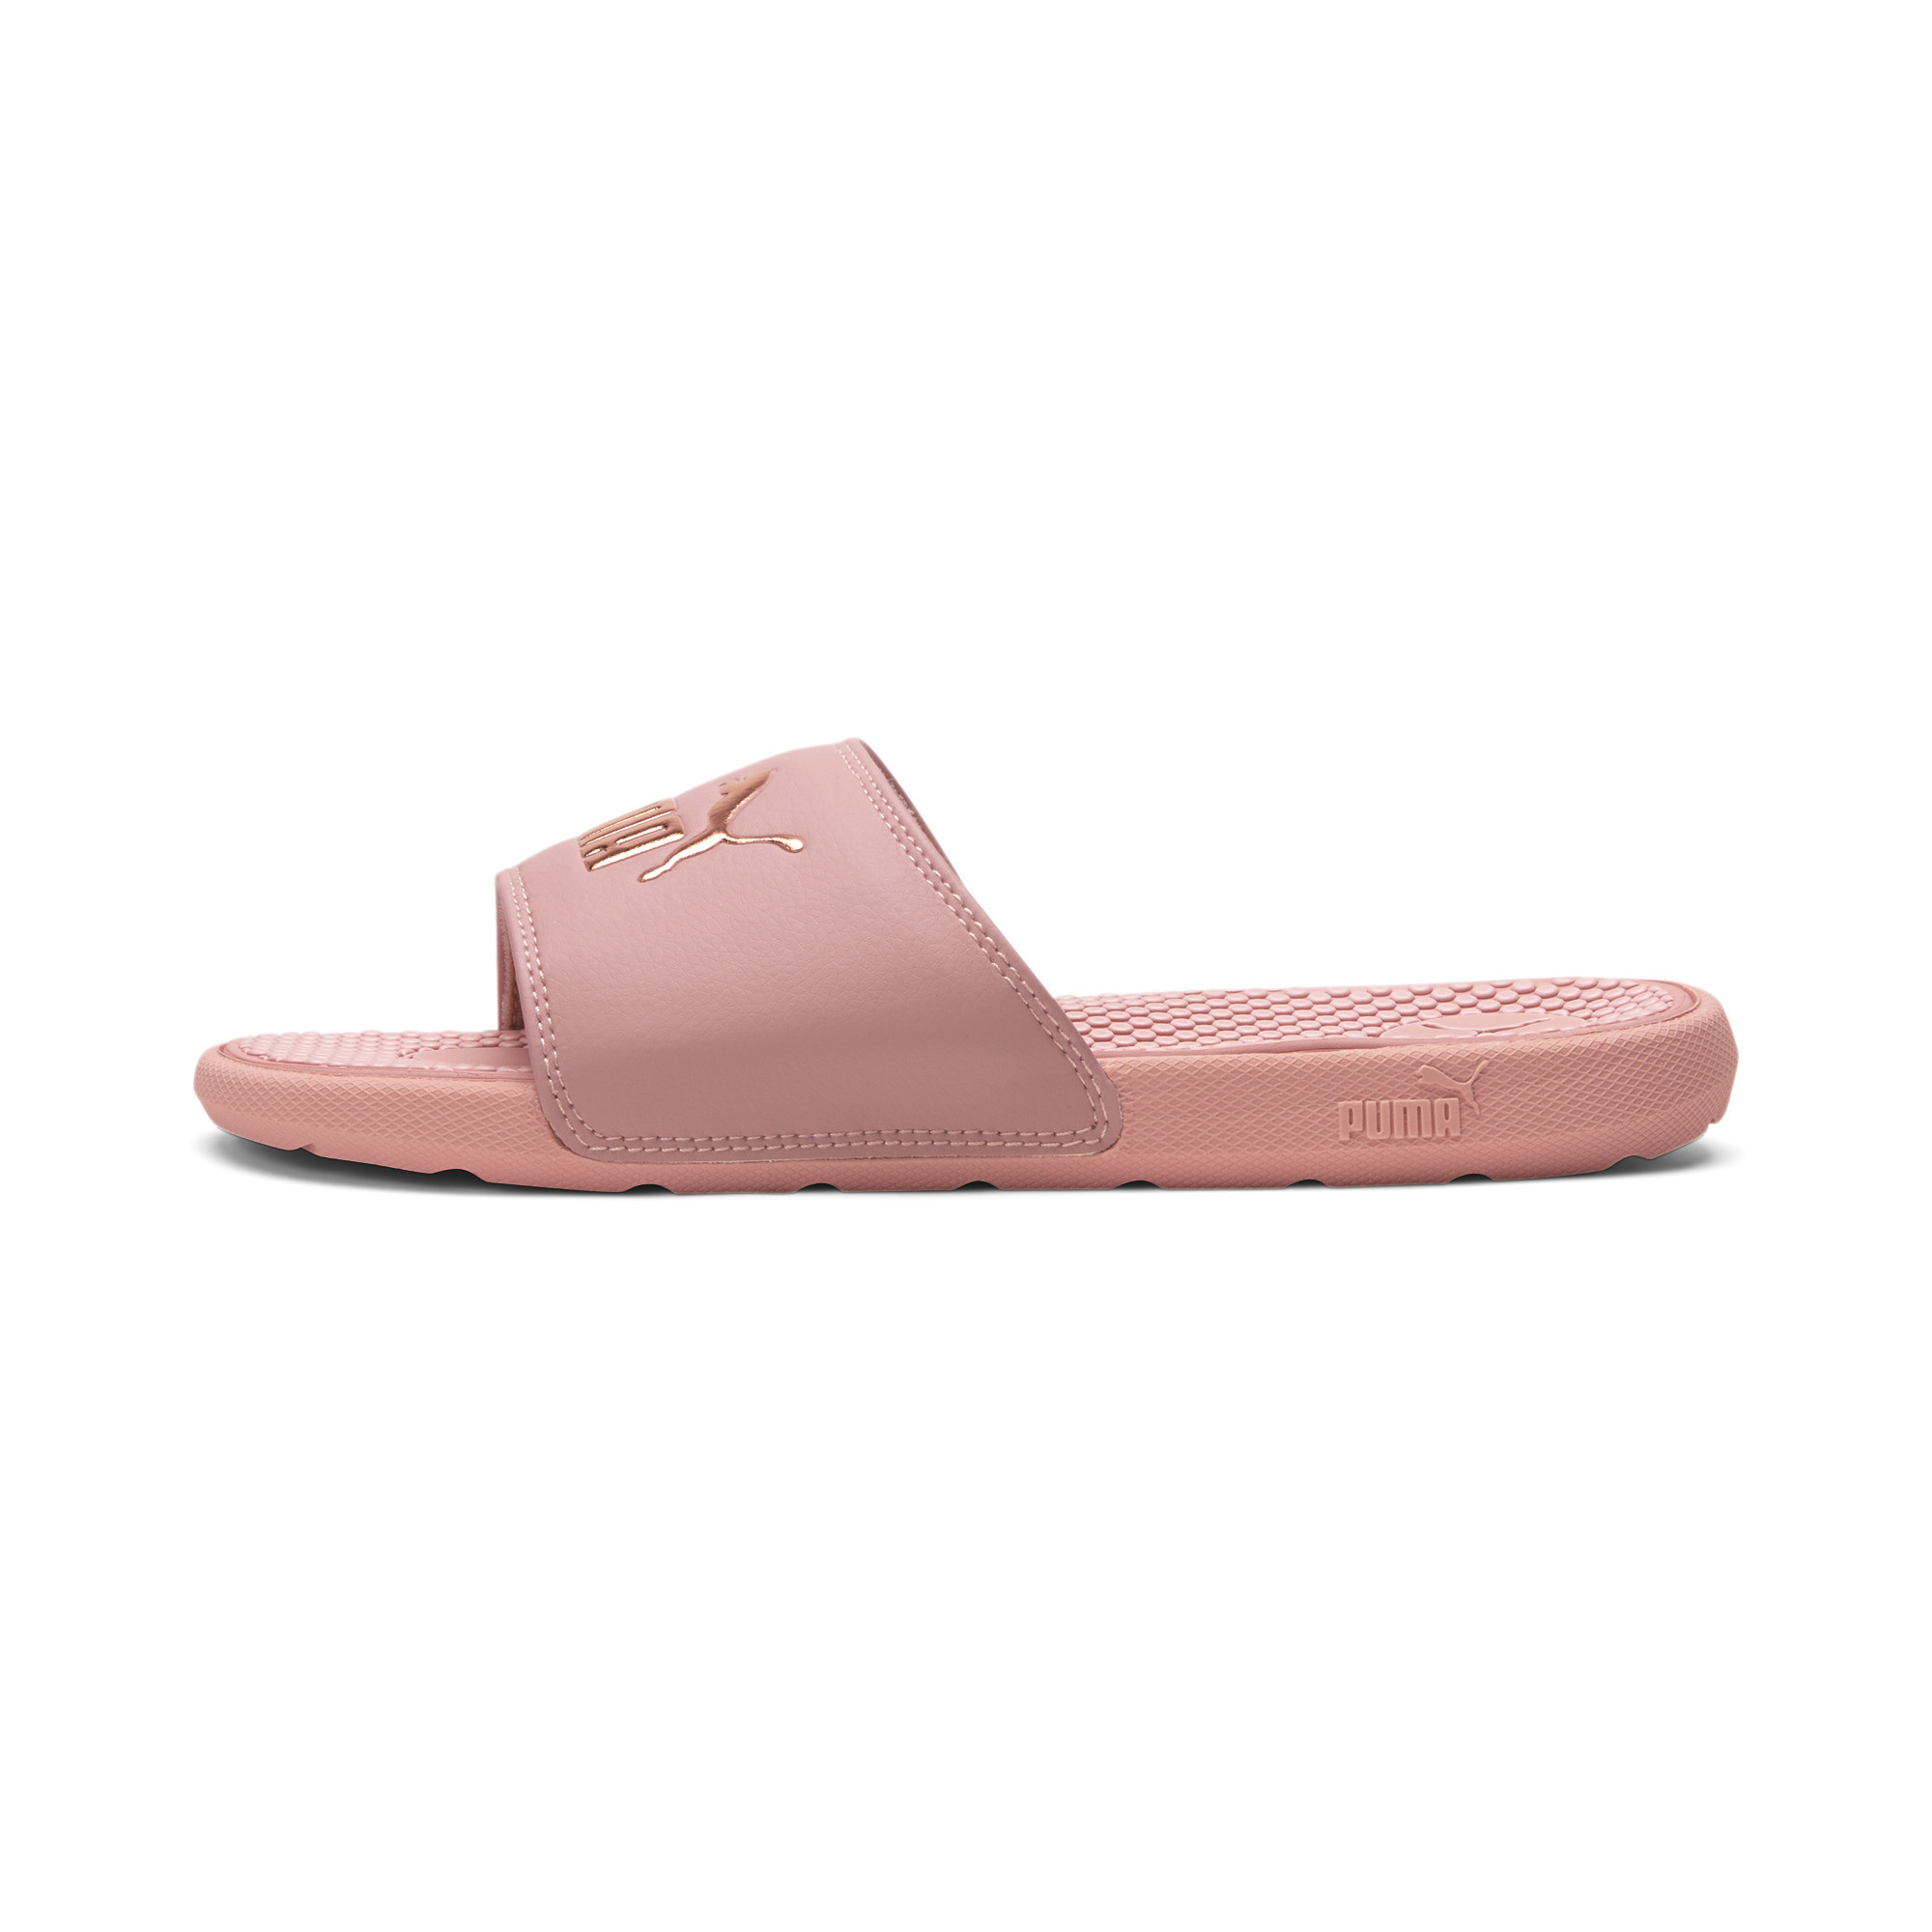 Puma Big Girls' Cool Cat Slide Sandals (sizes 4-7, Rose color only) 2 for $10 ($5 each) + free shipping